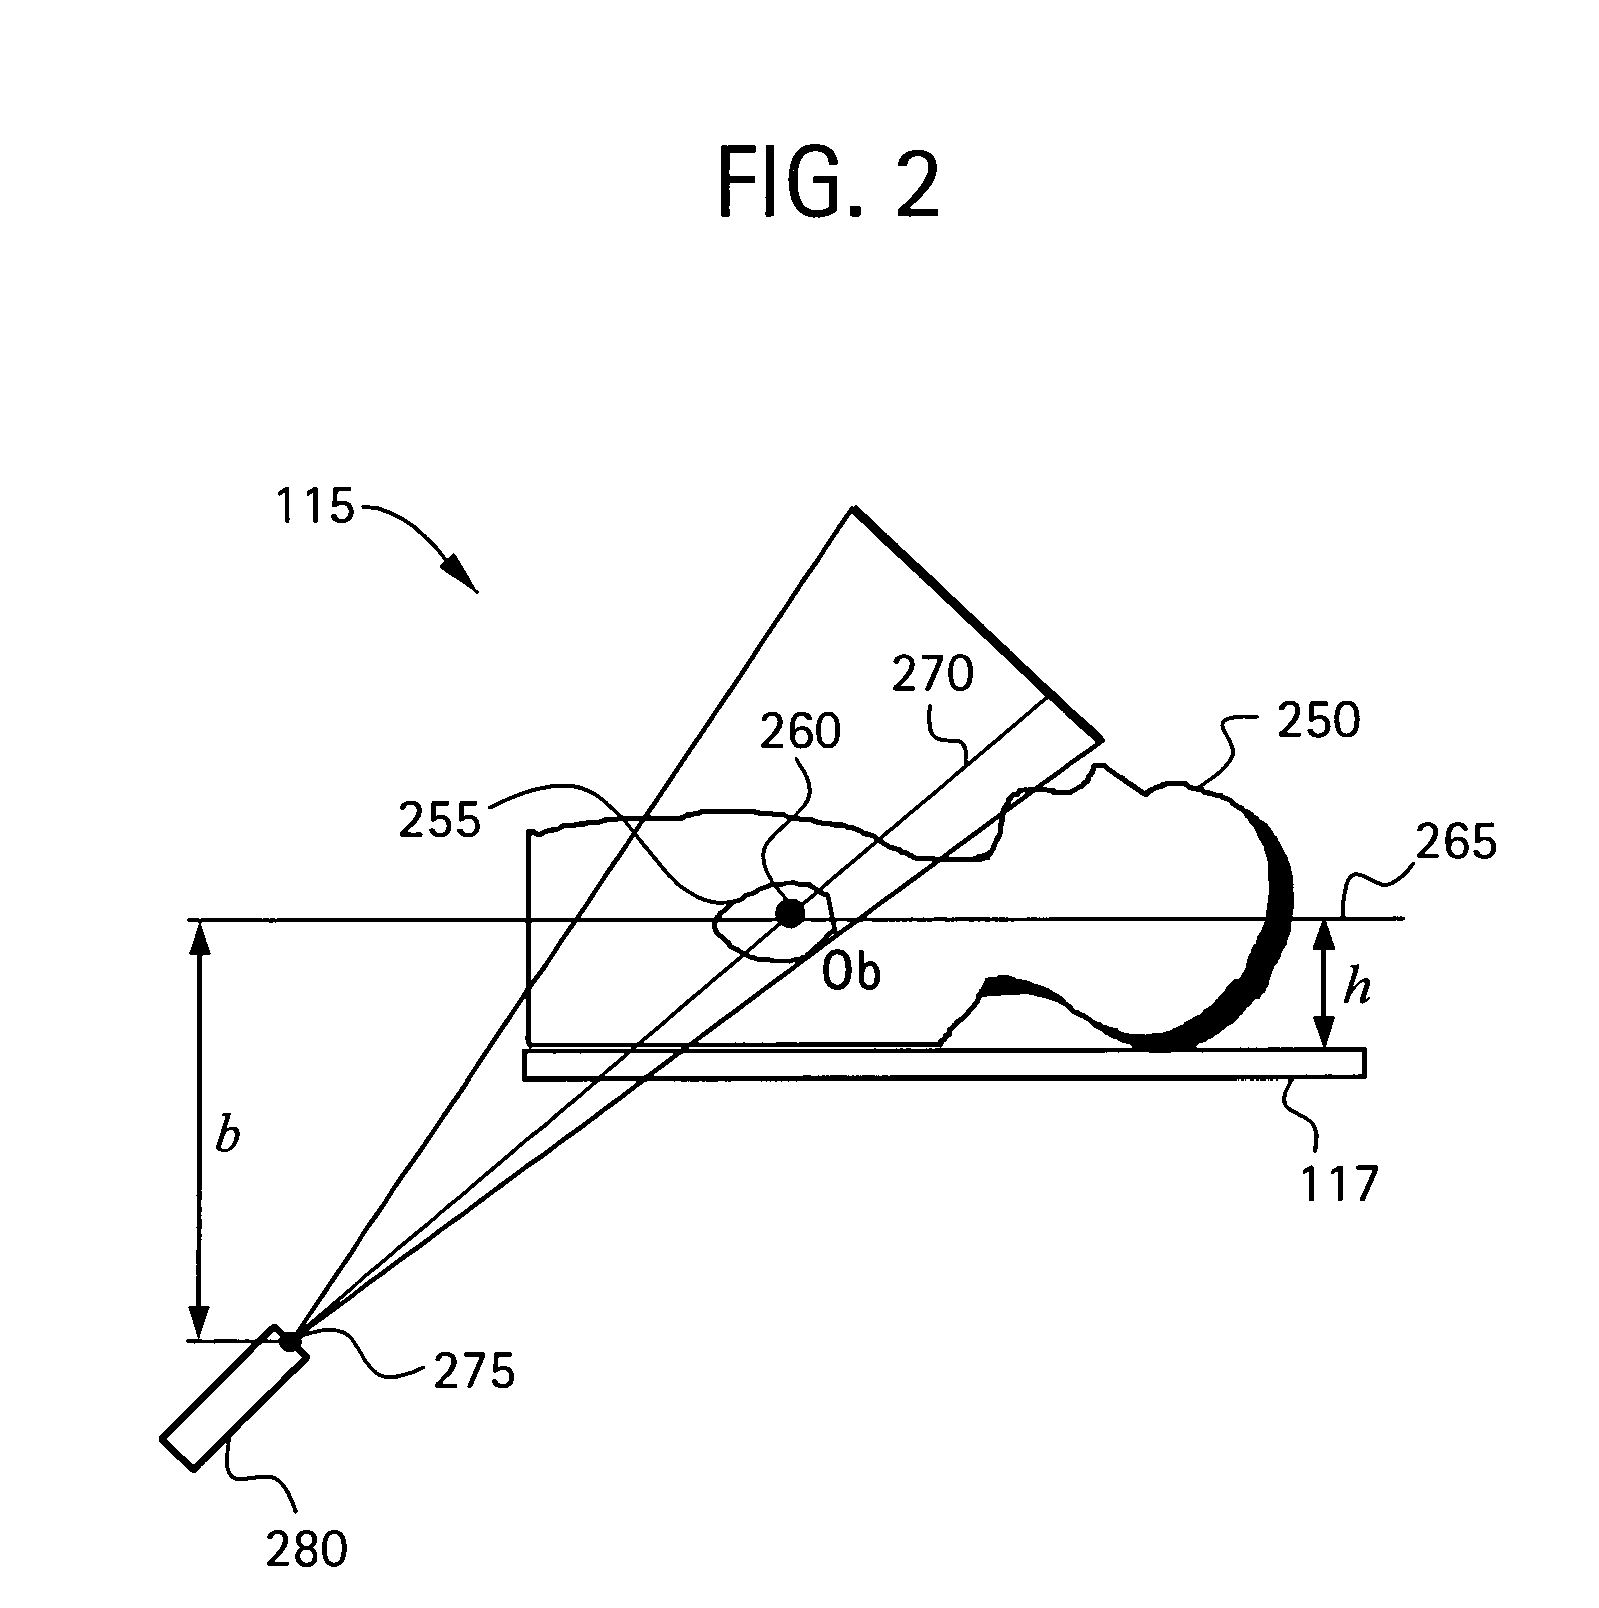 Method and apparatus for registering 3D models of anatomical regions of a heart and a tracking system with projection images of an interventional fluoroscopic system